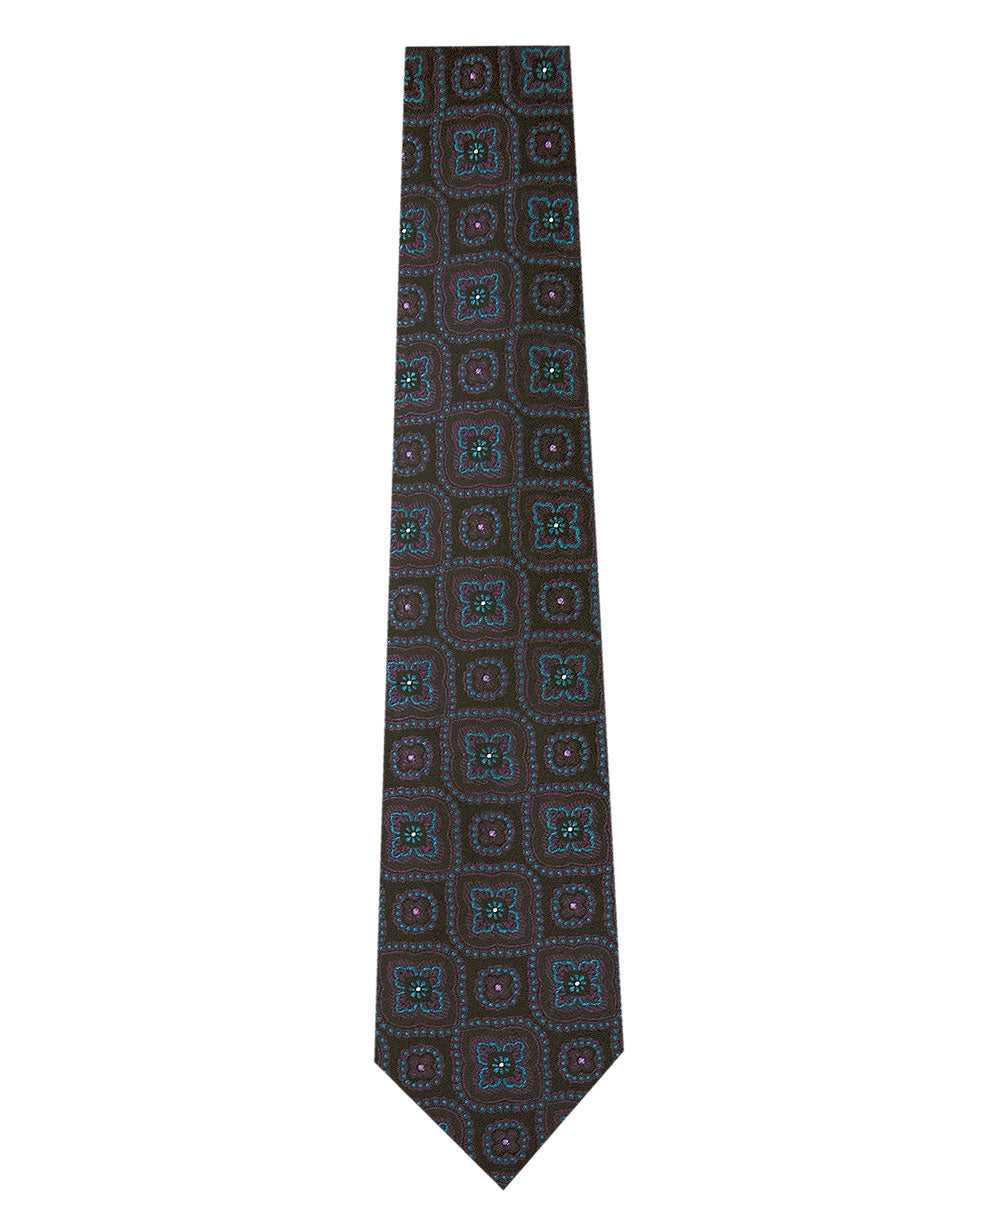 Black Silk Tie with Purple and Teal Pattern Long